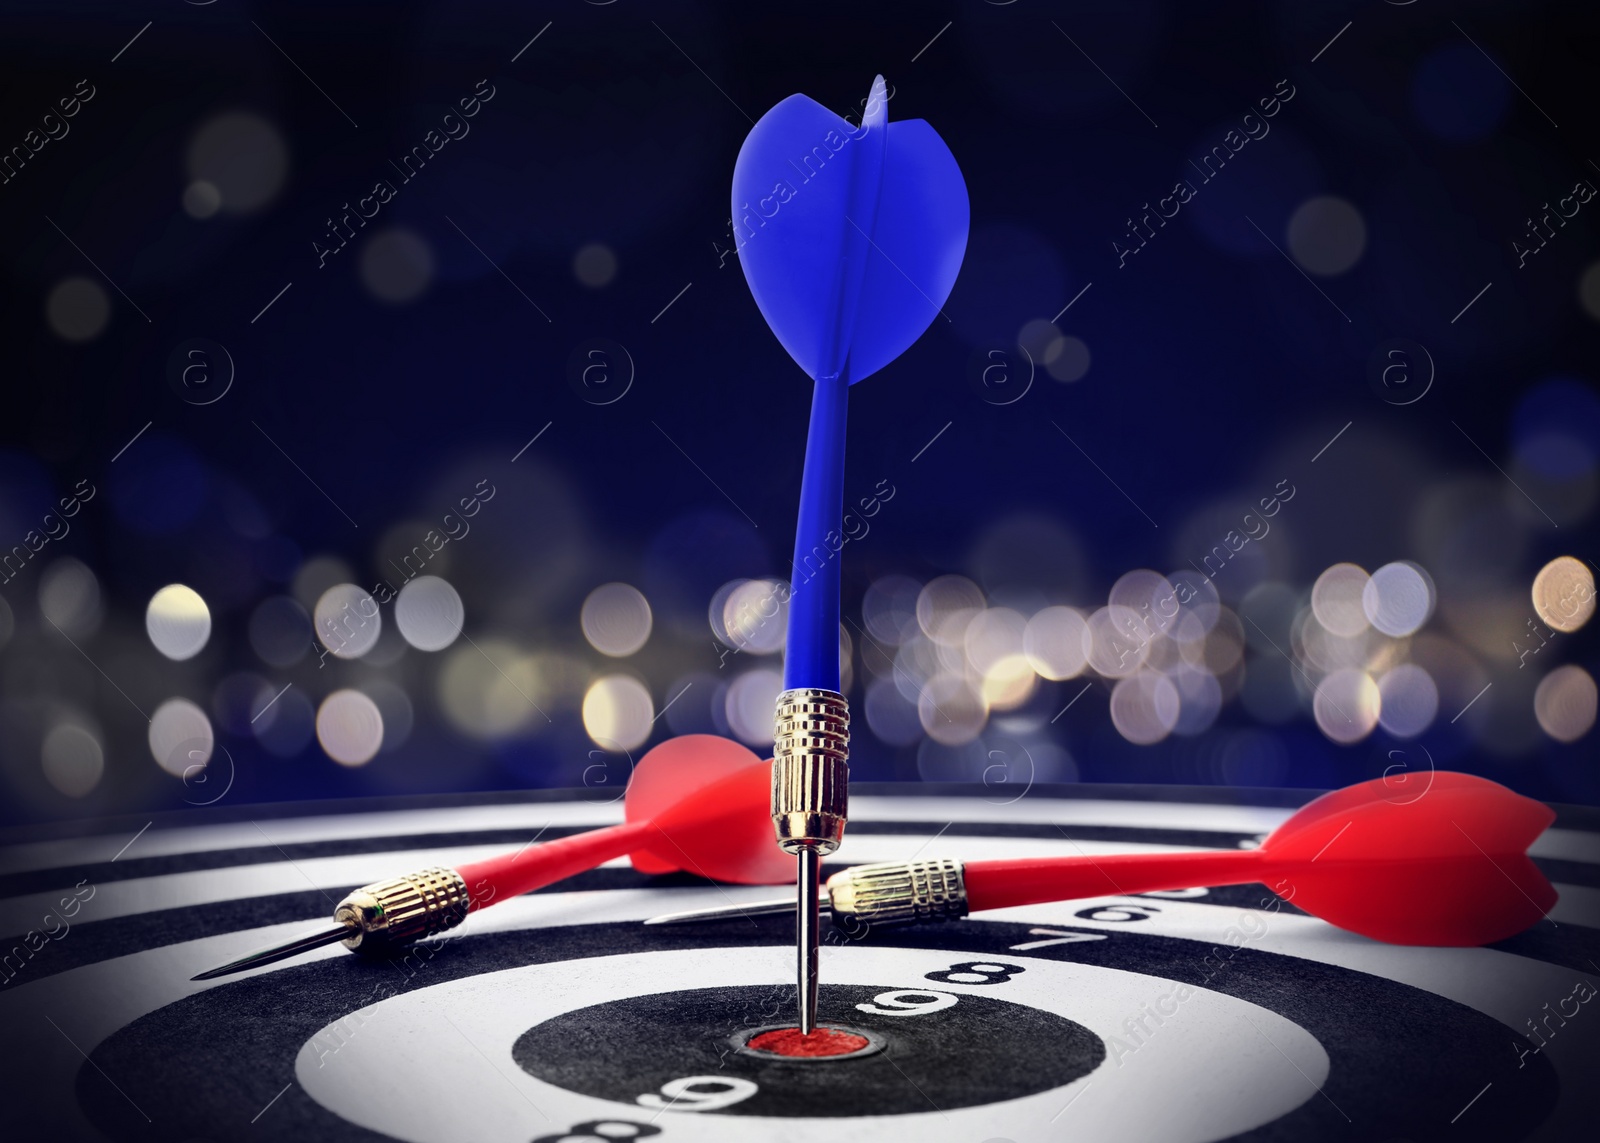 Image of Dart board with blue arrow hitting target against blurred background, bokeh effect